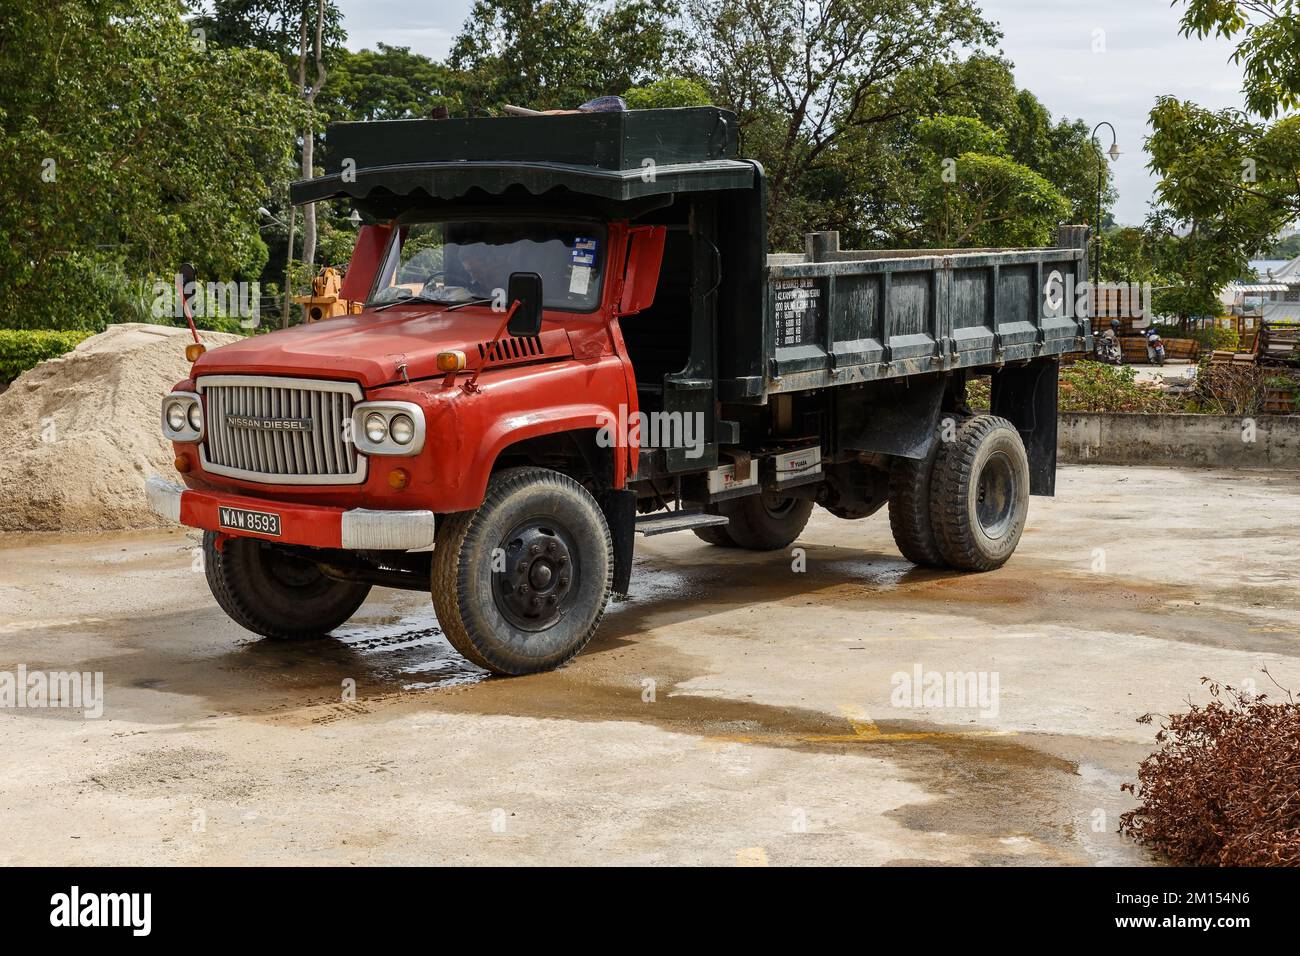 Air Itam, Penang, Malaysia - November 27, 2017: Old Nissan Diesel Truck. car with a red cab is standing on a construction site. Stock Photo